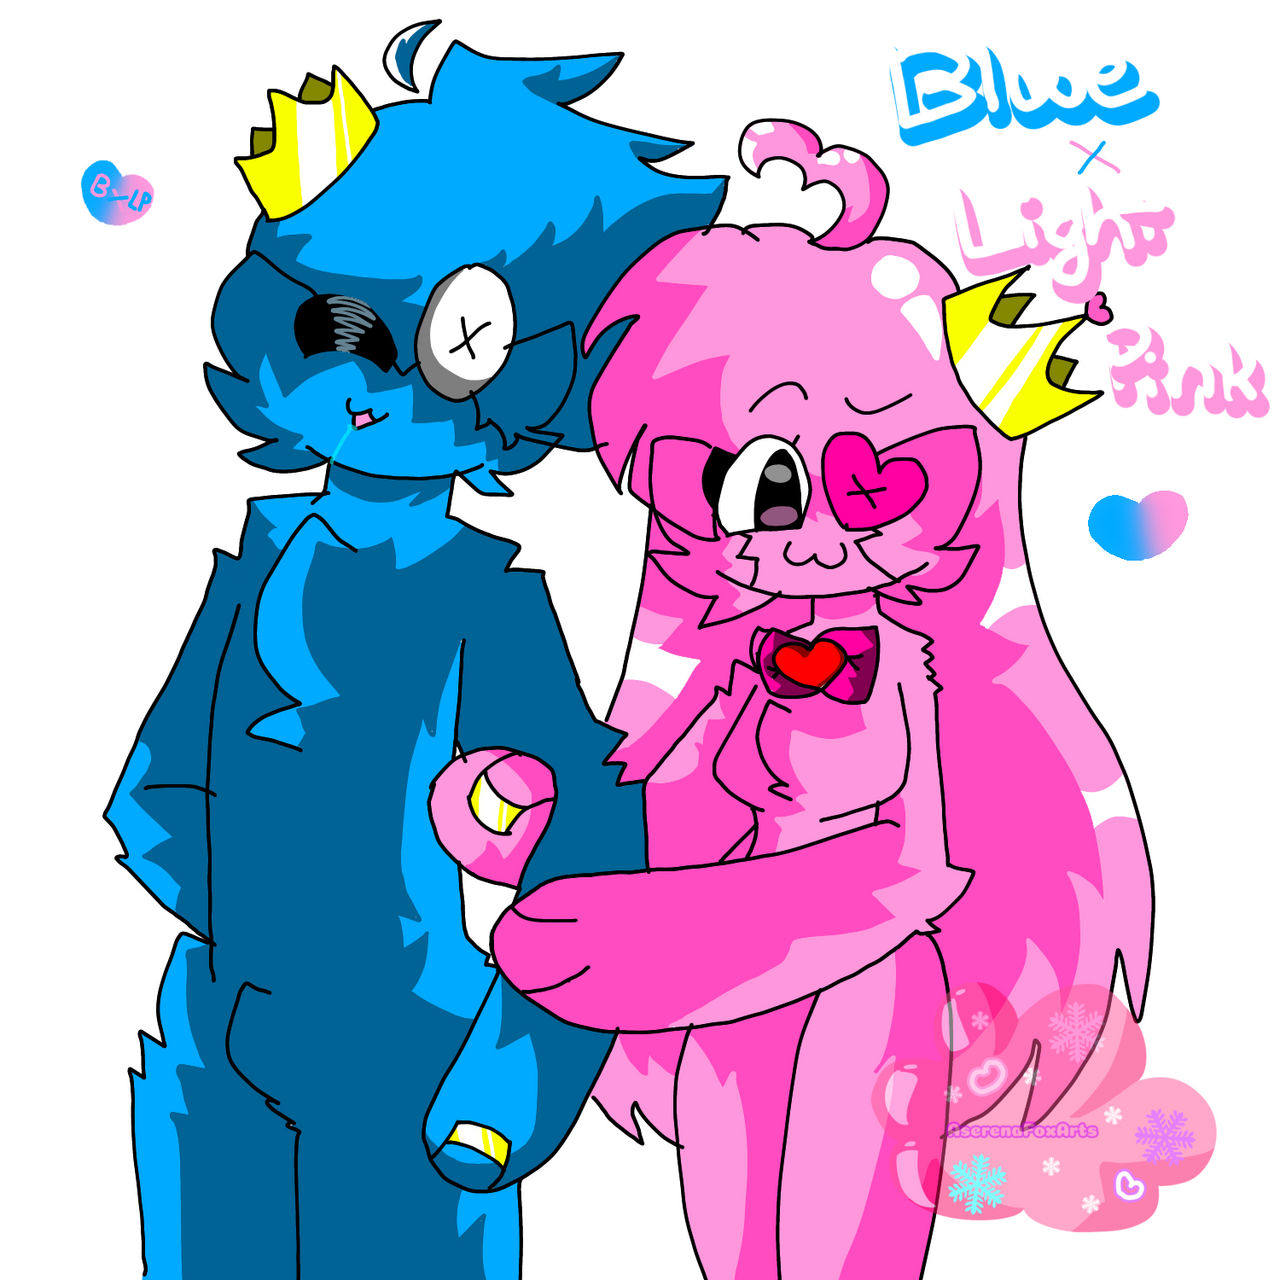 BLUE AND PINK FRIENDS! by KatieLover1407 on DeviantArt